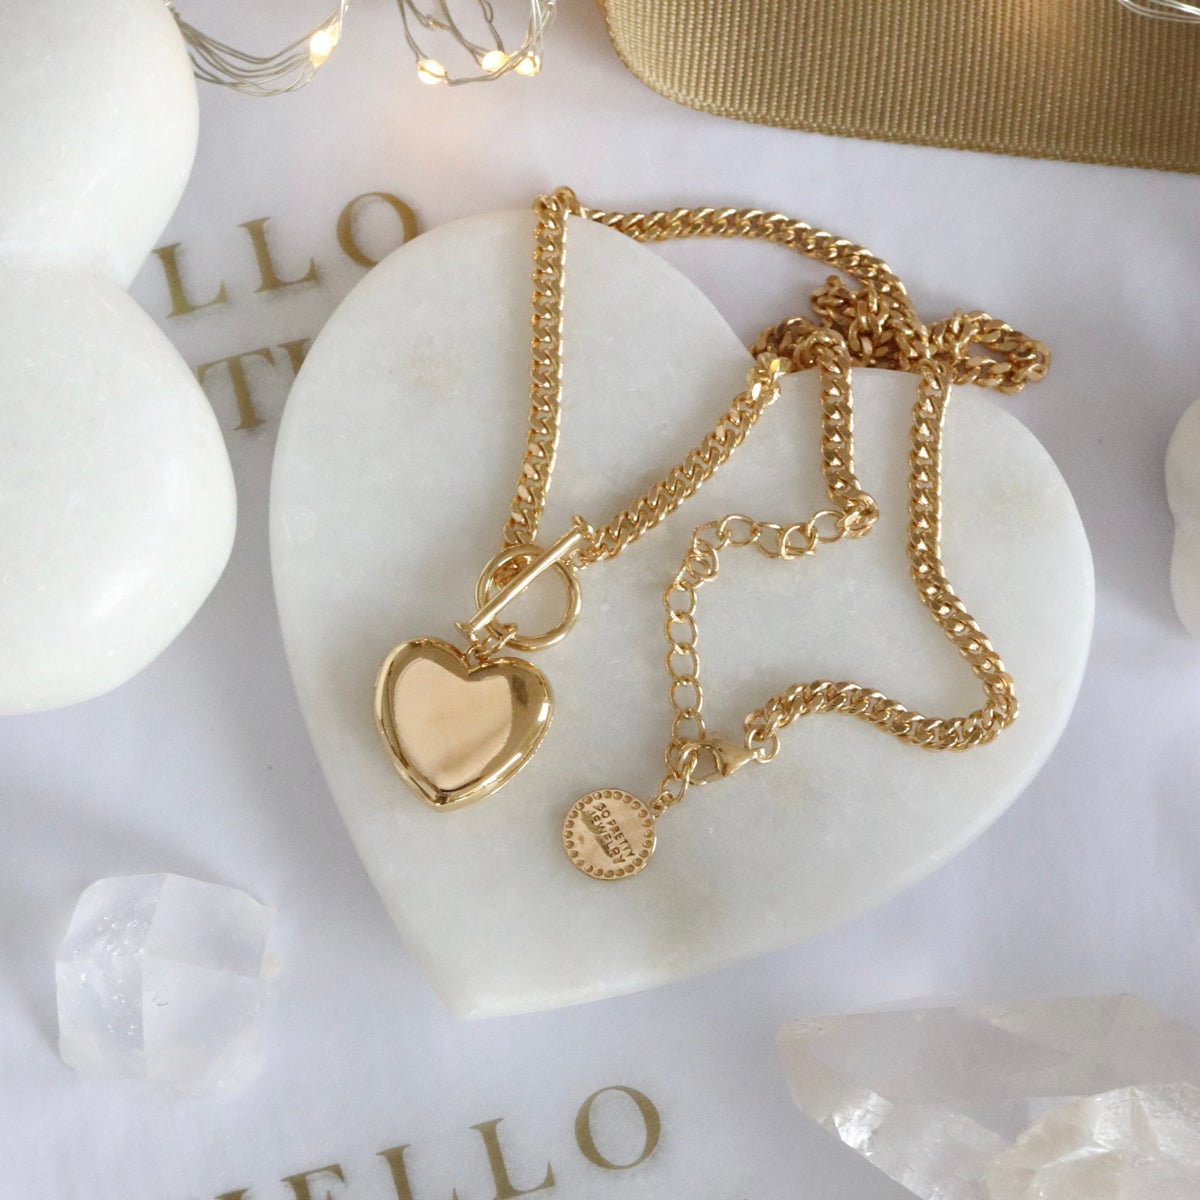 FRAICHE INSPIRE SWEETHEART LOCKET NECKLACE - GOLD - SO PRETTY CARA COTTER